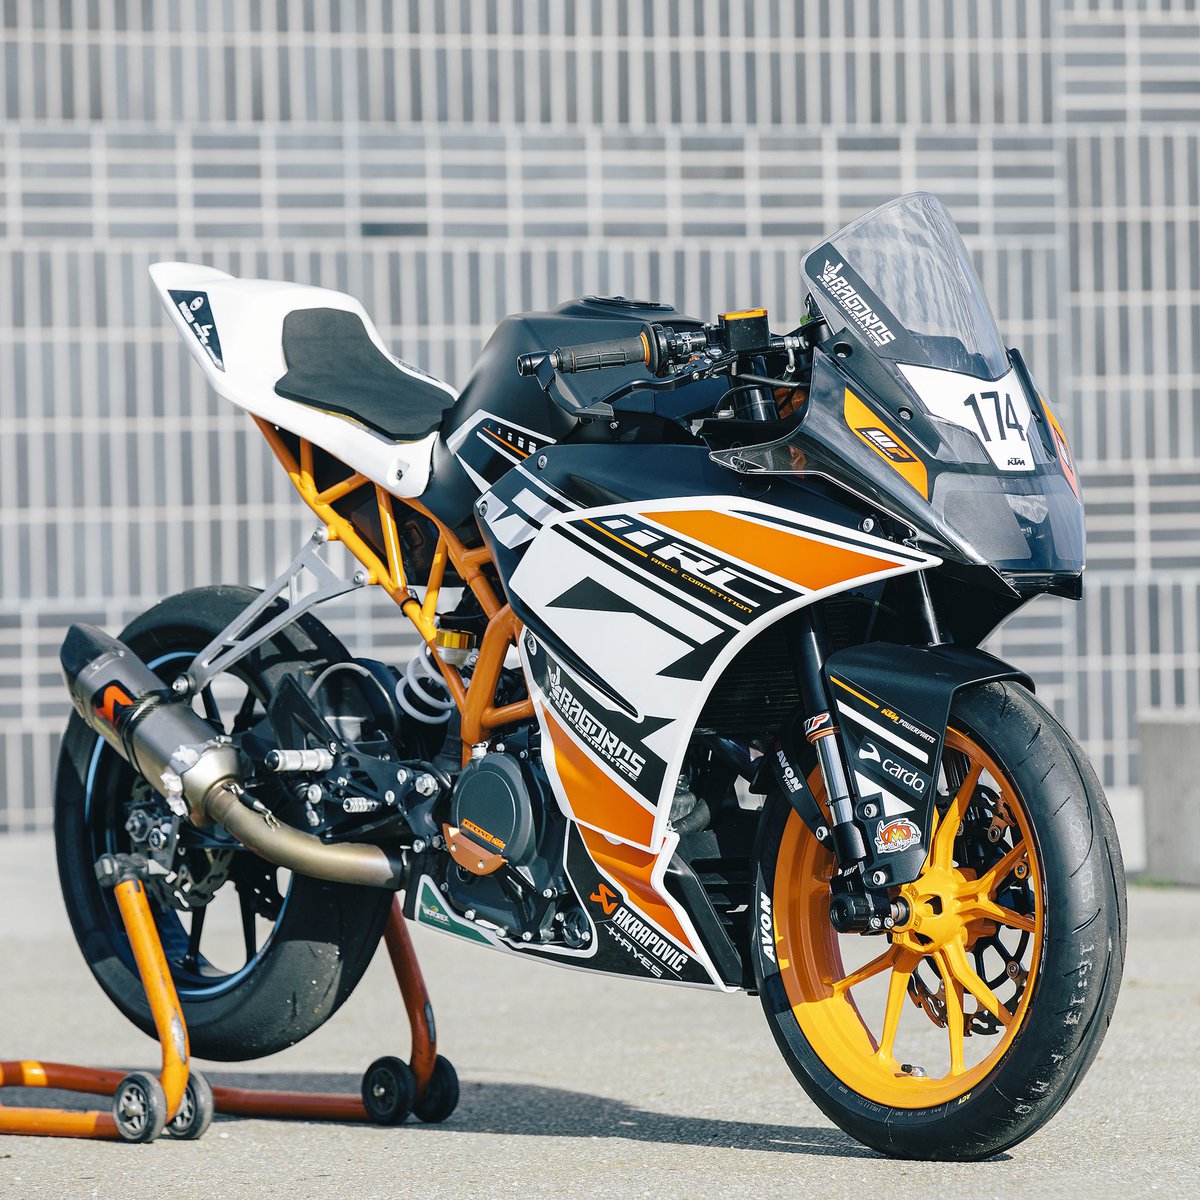 I've done massive upgrade on my KTM RC 390, featuring #KTMPowerParts brake lever, foot rest, sticker kit and more. Make your KTM RC race ready 👉 bit.ly/PowerPartsRC #ktm #ktmrc #motorcycle